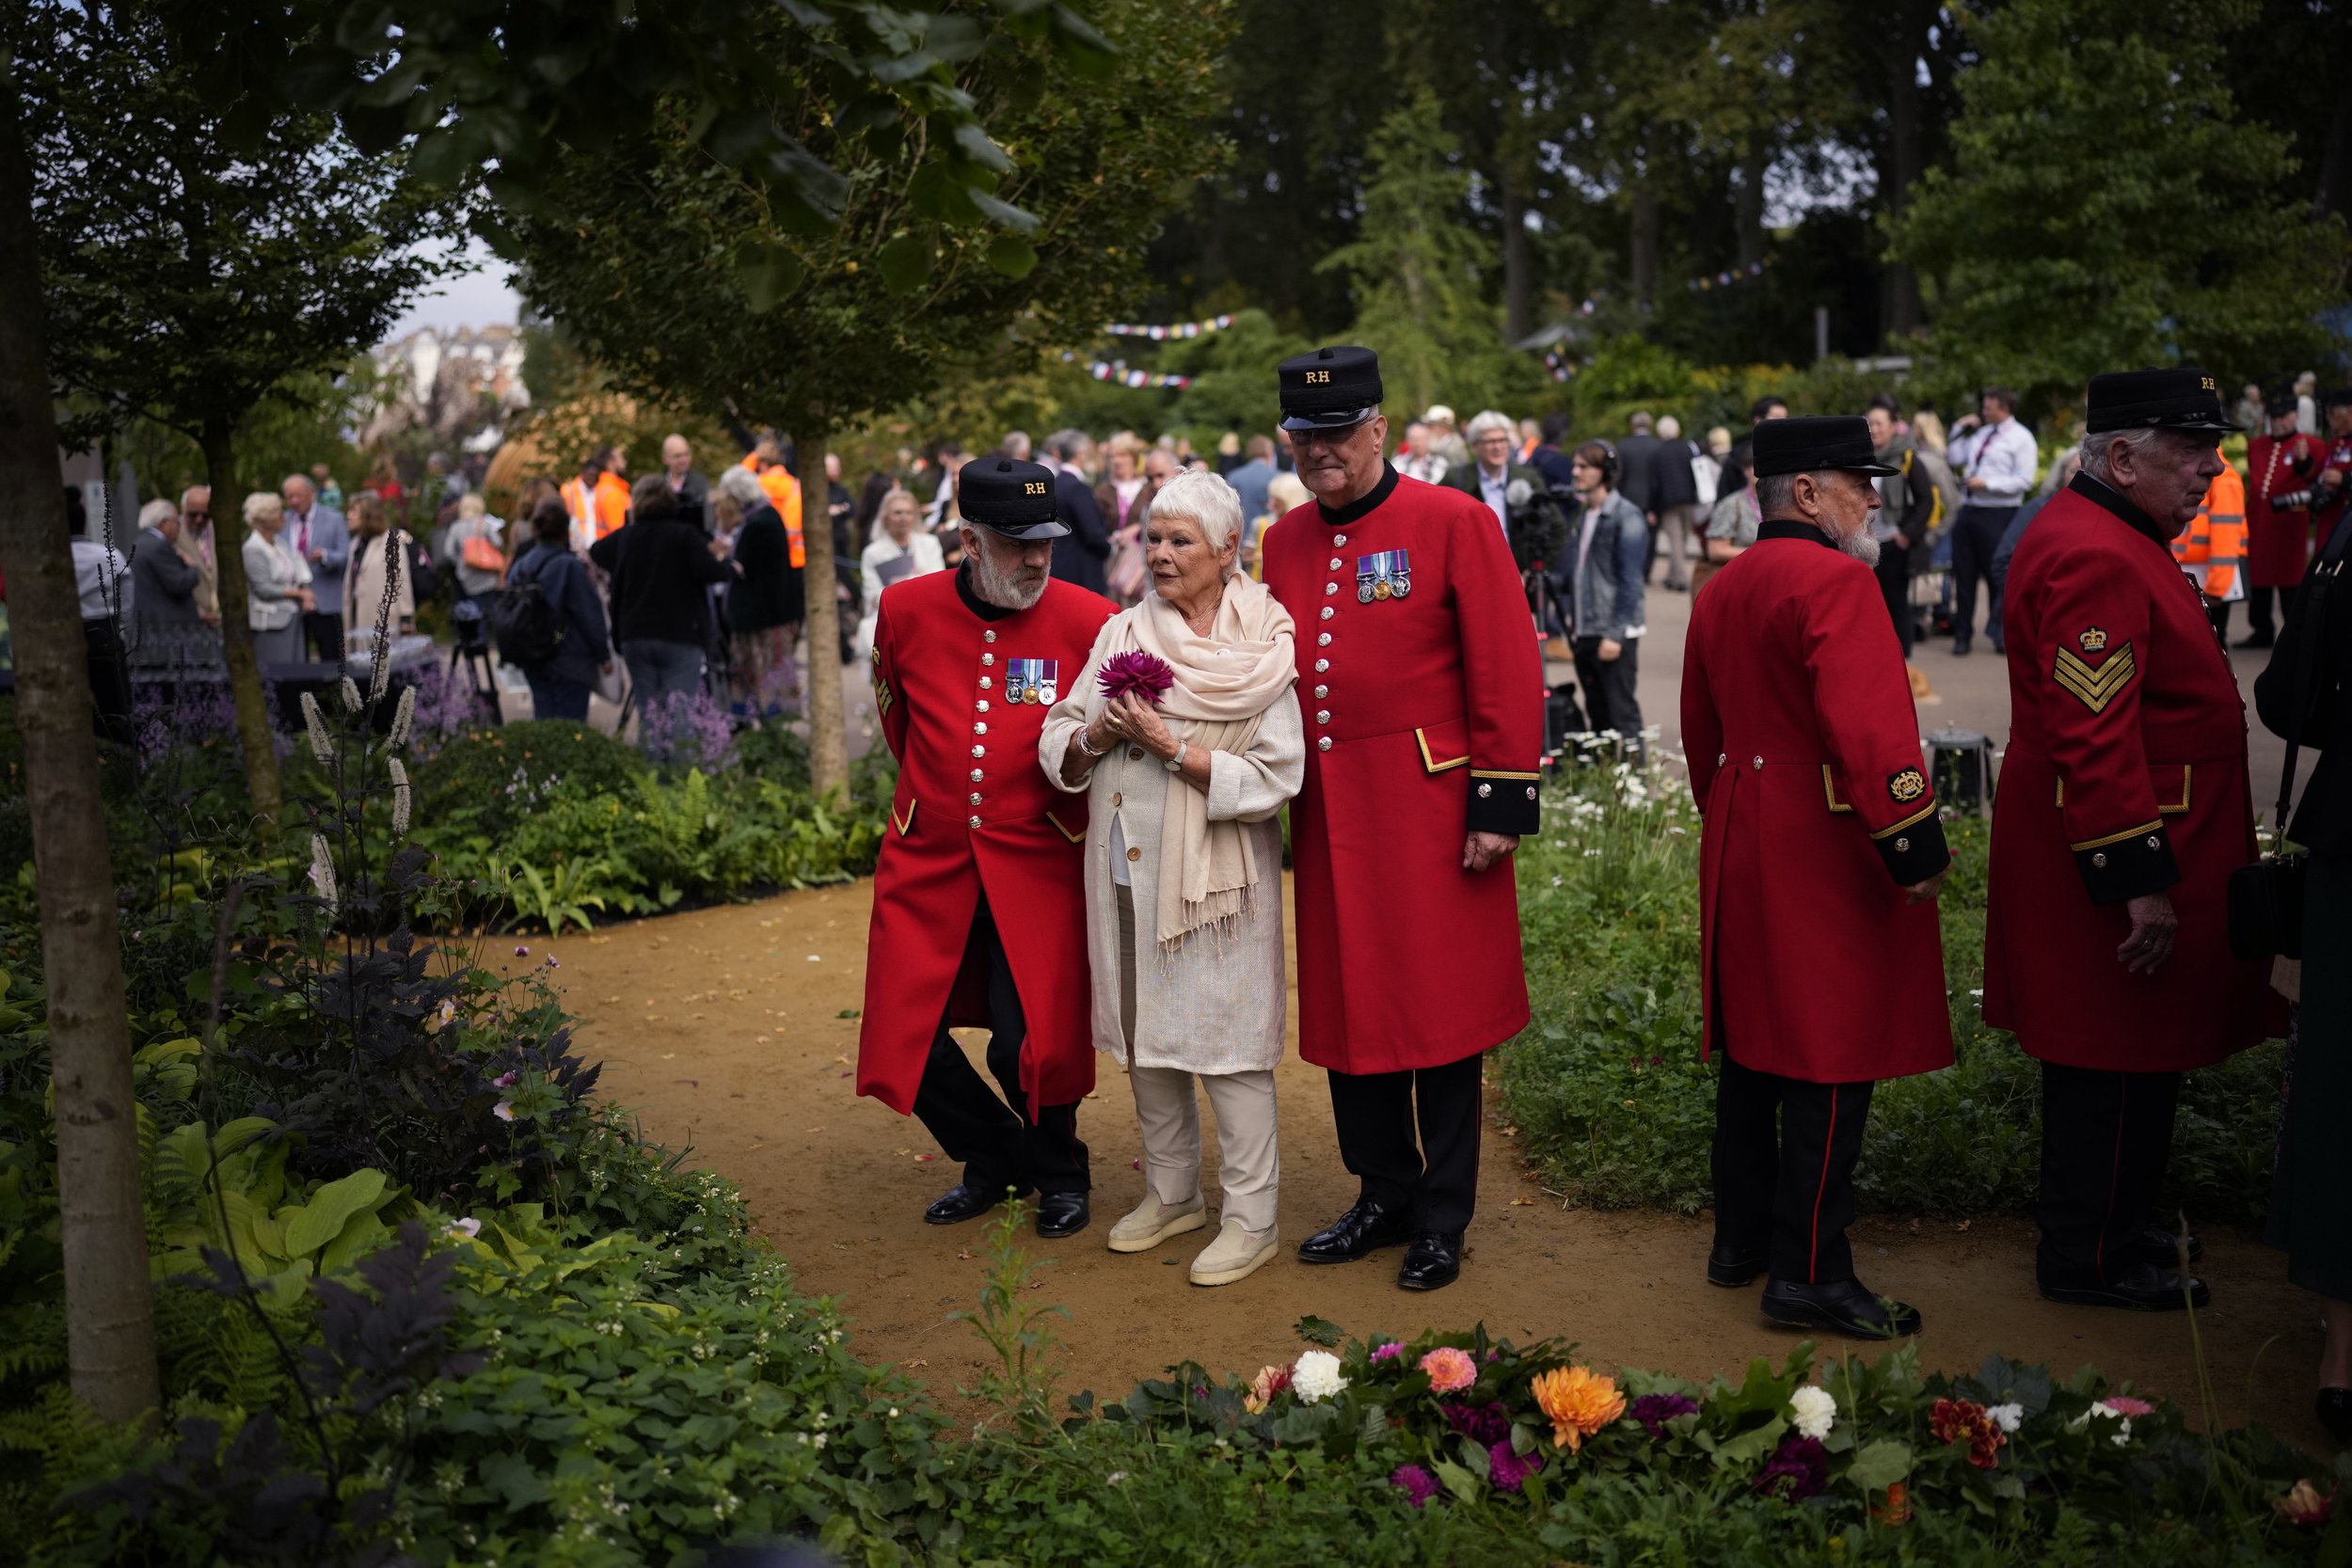  Chelsea Pensioners pose for photographs with British actress Dame Judi Dench as she officially opens "The Queen's Green Canopy" show garden at the Royal Horticultural Society’s Chelsea Flower Show in London, on Sept. 20, 2021. (AP Photo/Matt Dunham)